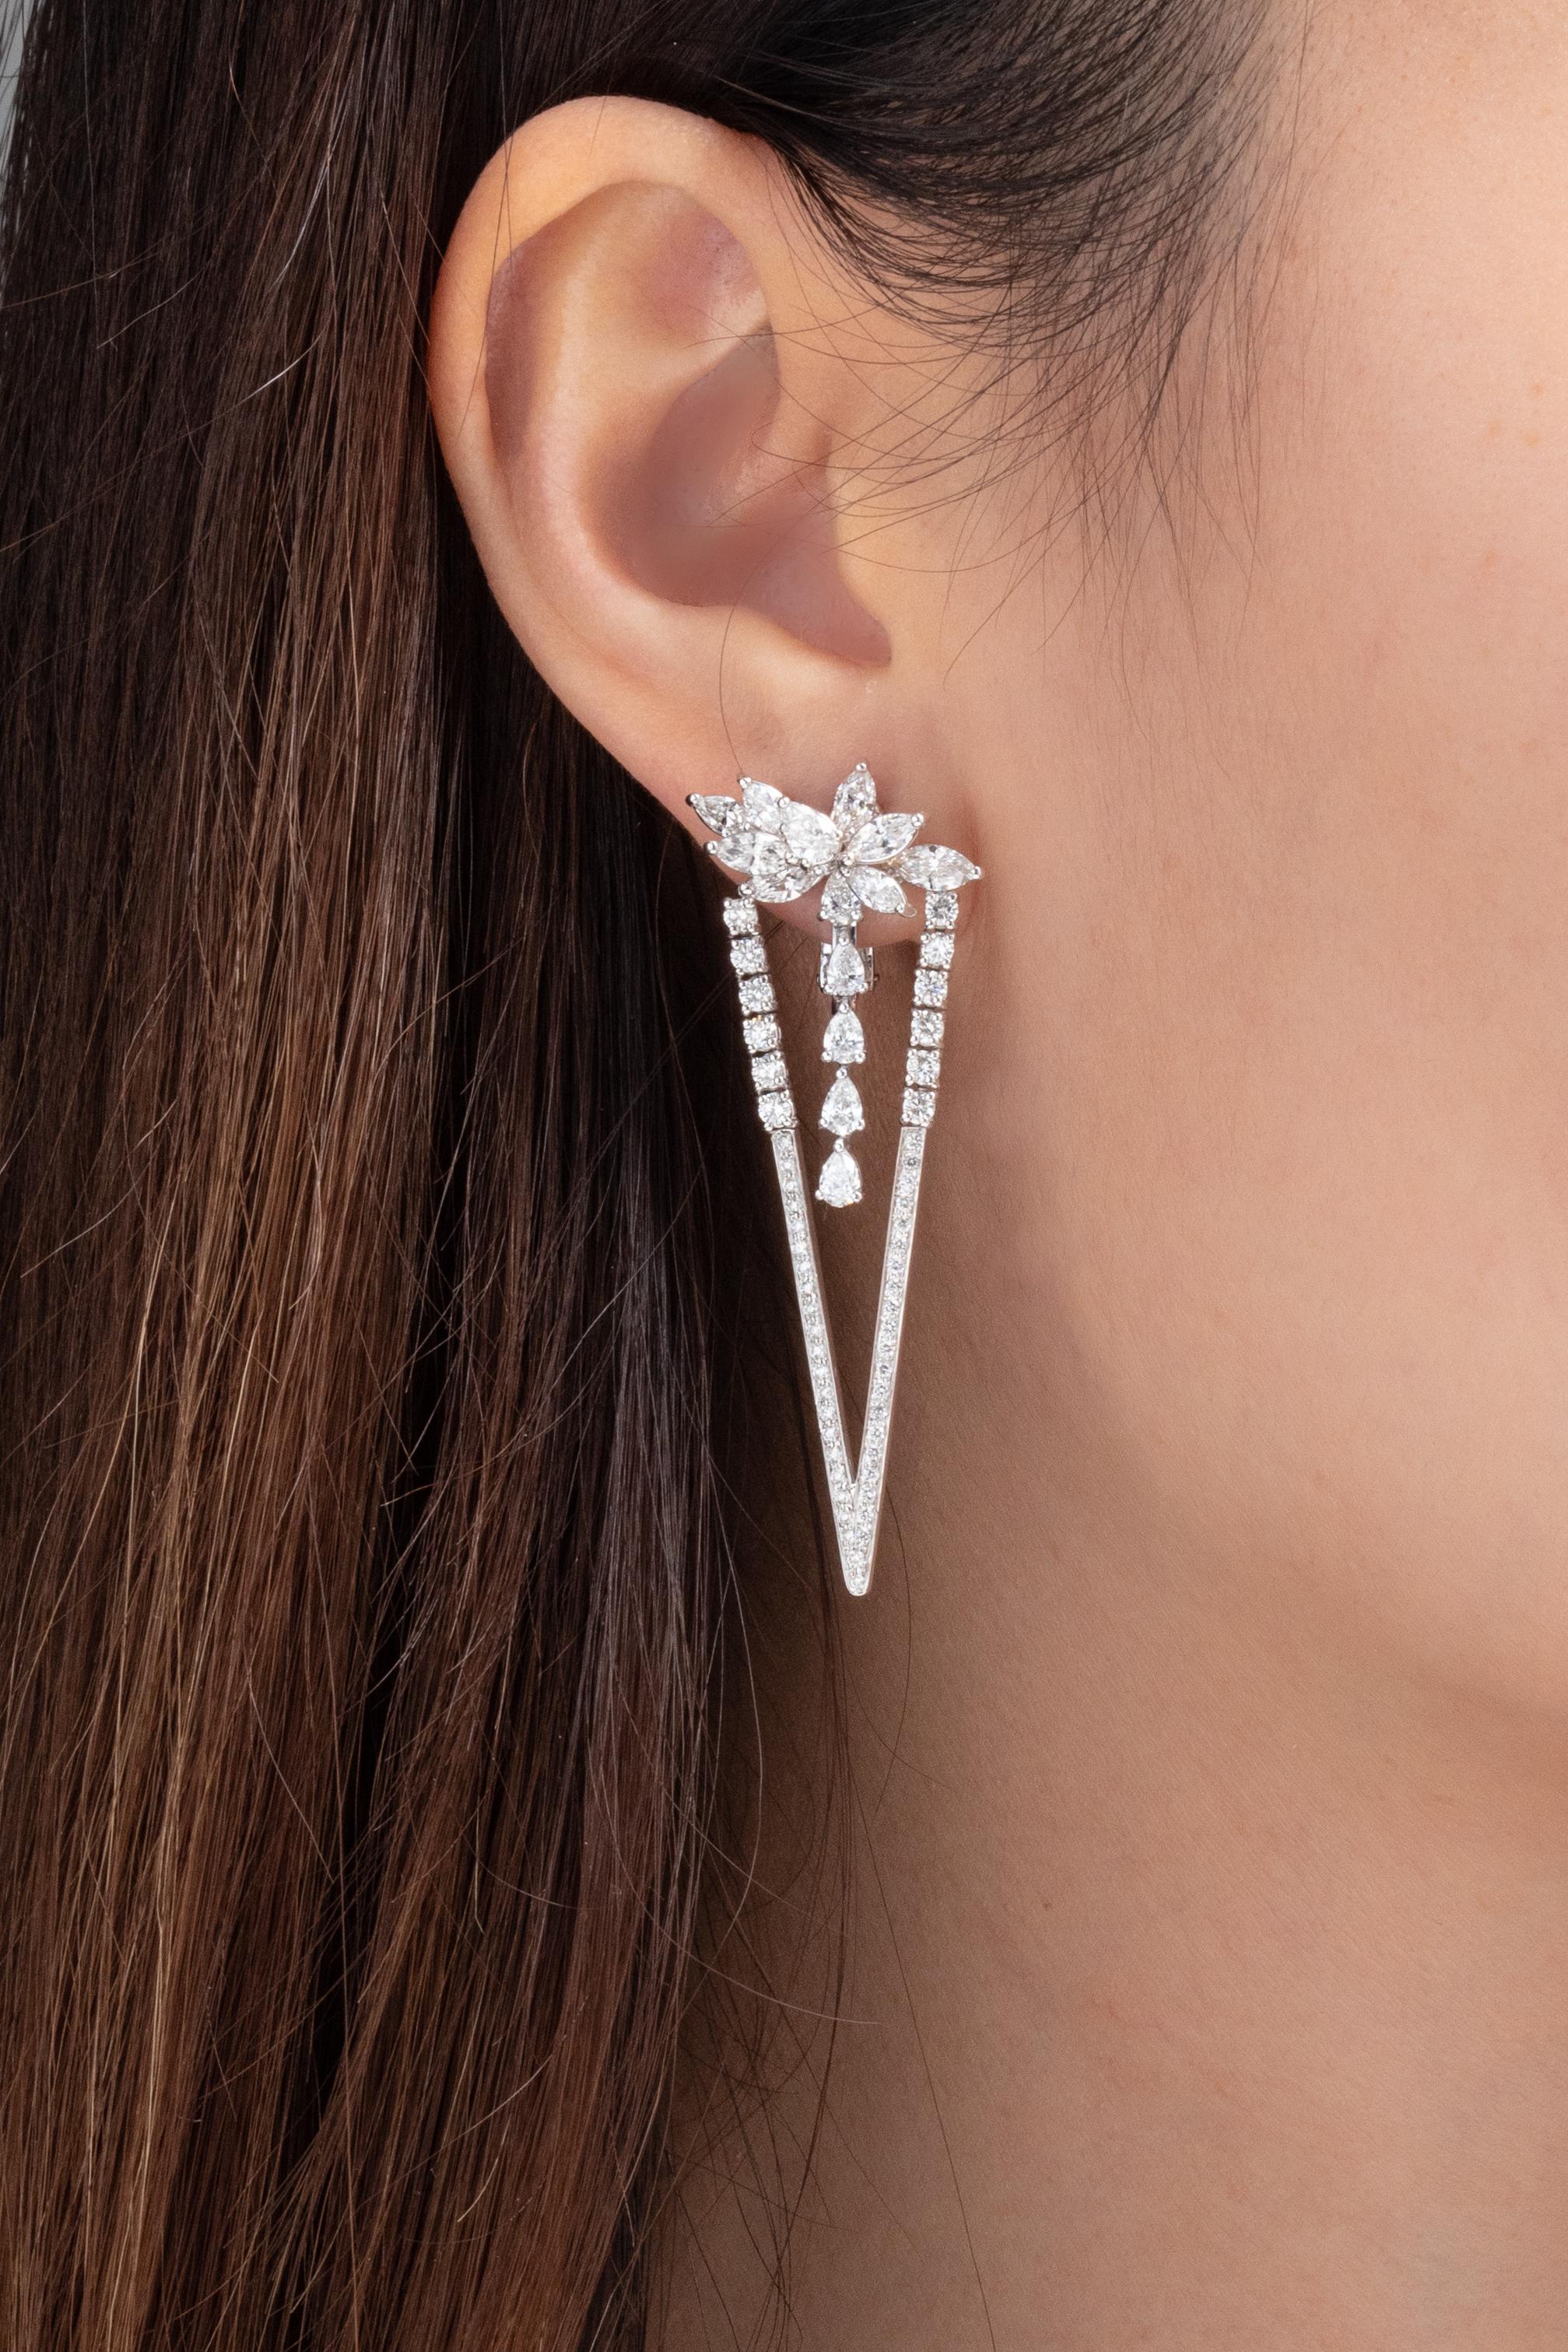 Sculptural lines and shape juxtaposition inspired this pair of diamond earrings by Vihari Jewels. The earrings are set in 18K White Gold and feature 16 marquise shaped diamonds, 12 pear shaped diamonds, and 118 round shaped diamonds. All diamonds